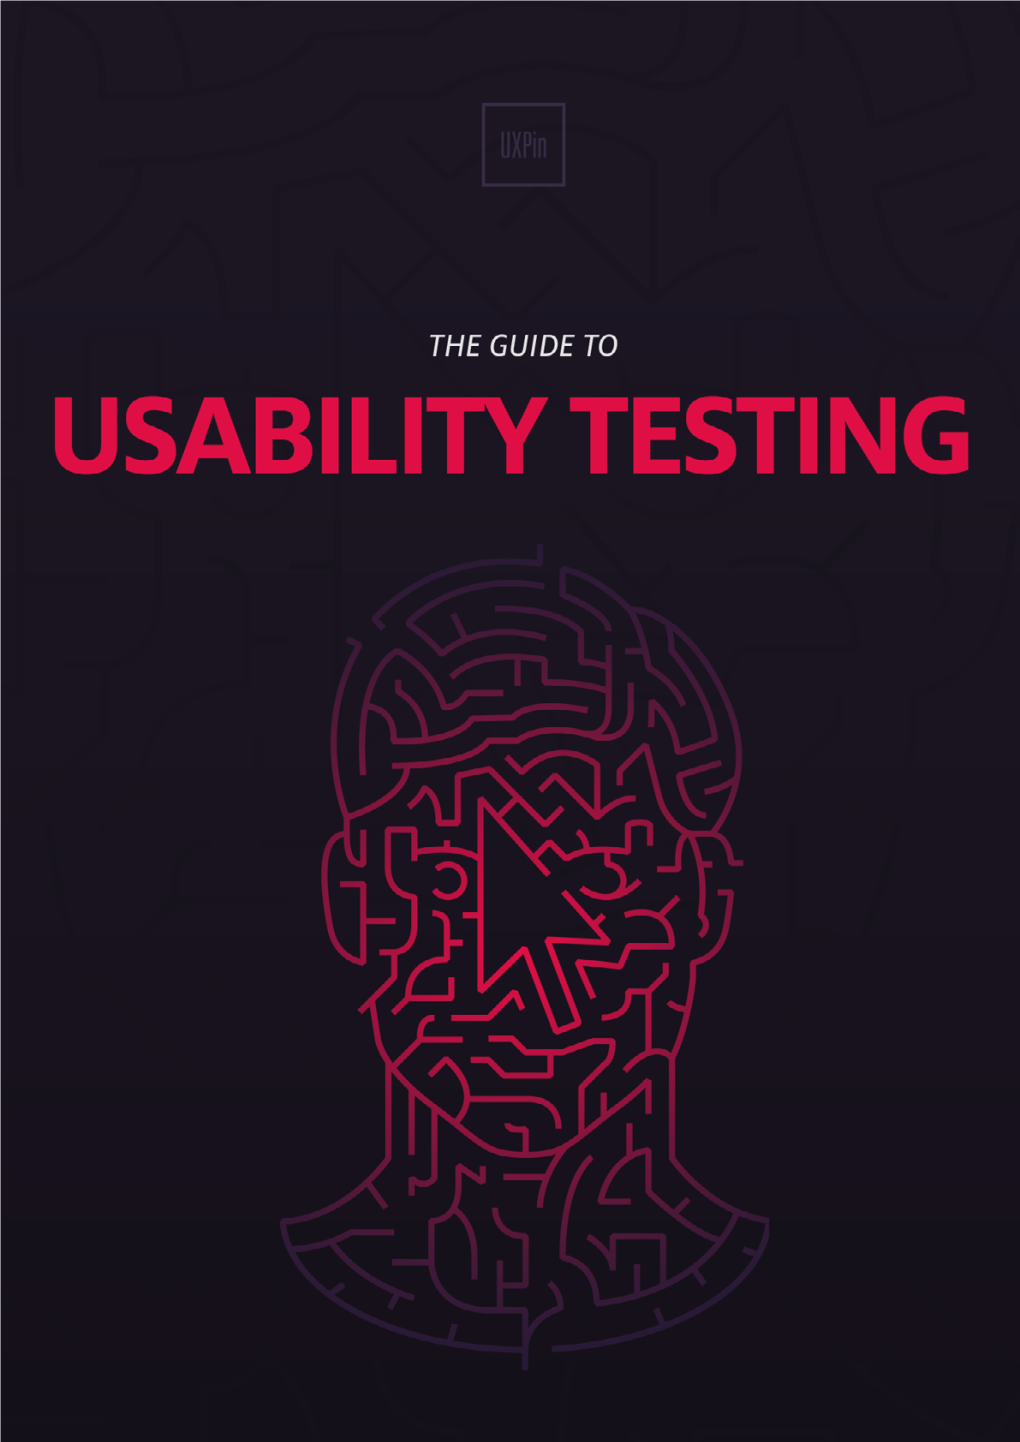 The Guide to Usability Testing